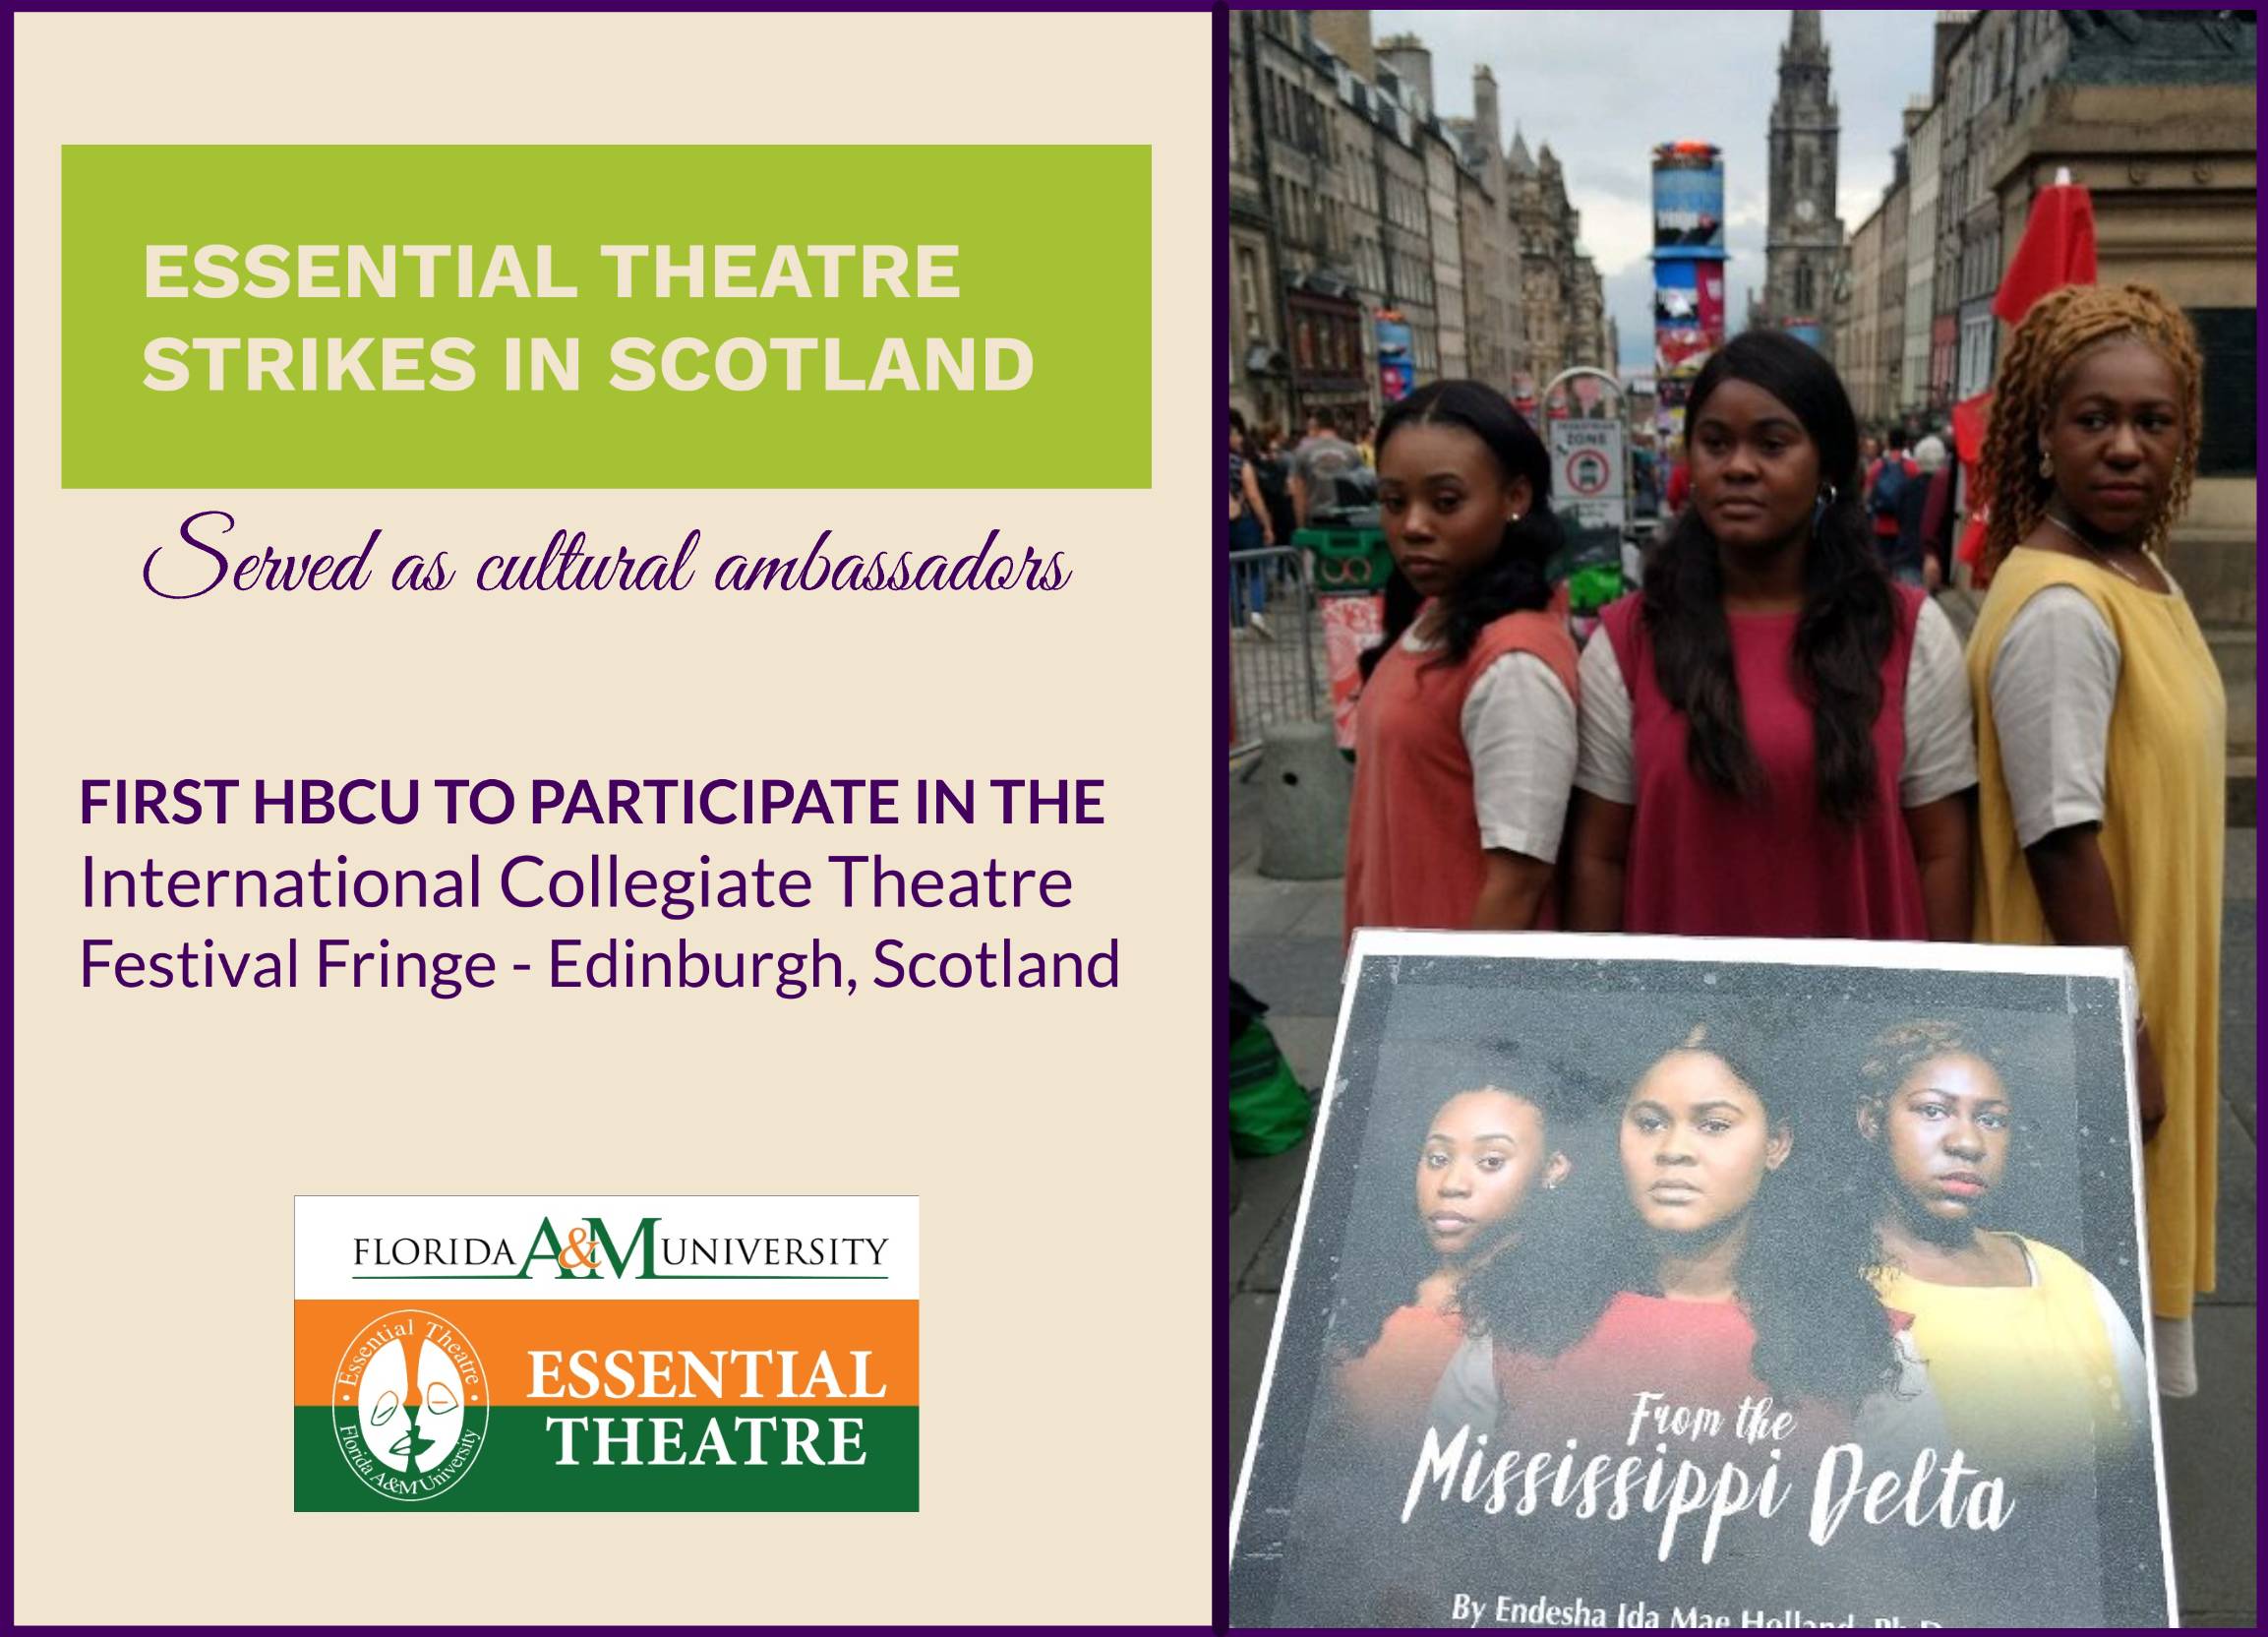 In 2018, FAMU became the first HBCU to participate in the International Collegiate Theatre Festival Fringe in Edinburgh, Scotland. The FAMU Essential Theatre production of "From the Mississippi Delta" by Endesha Ida Mae Holland, Ph.D. was met with critical international acclaim. image